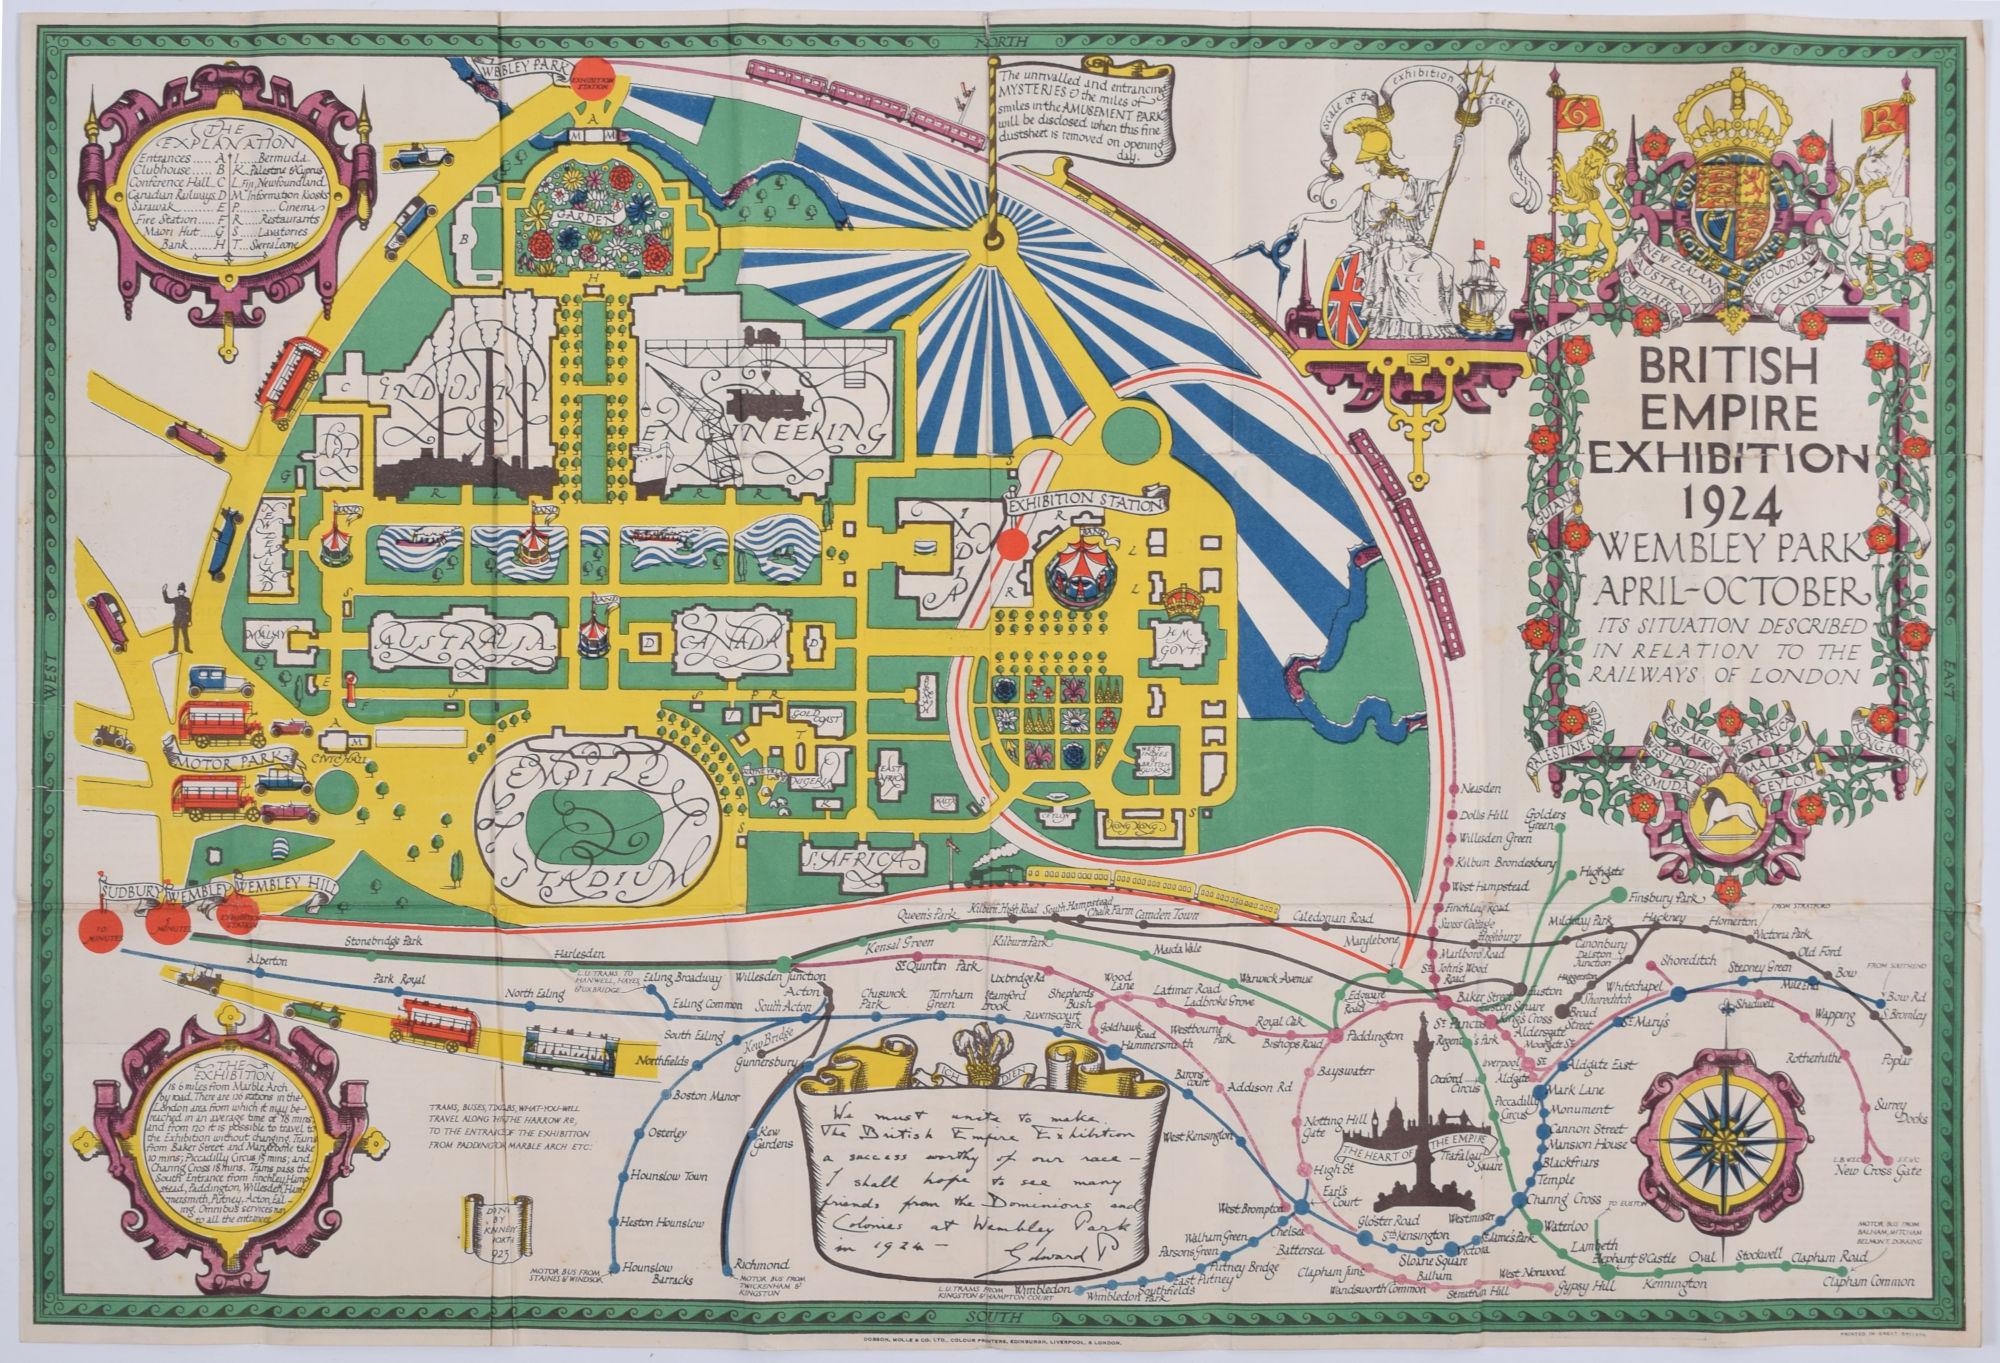 To see more, scroll down to "More from this Seller" and below it click on "See all from this Seller."

Stanley Kennedy North (1887 - 1942)
British Empire Exhibition Map (1924)
Lithograph
51 x 75 cm

This fascinating and attractive map with elaborate